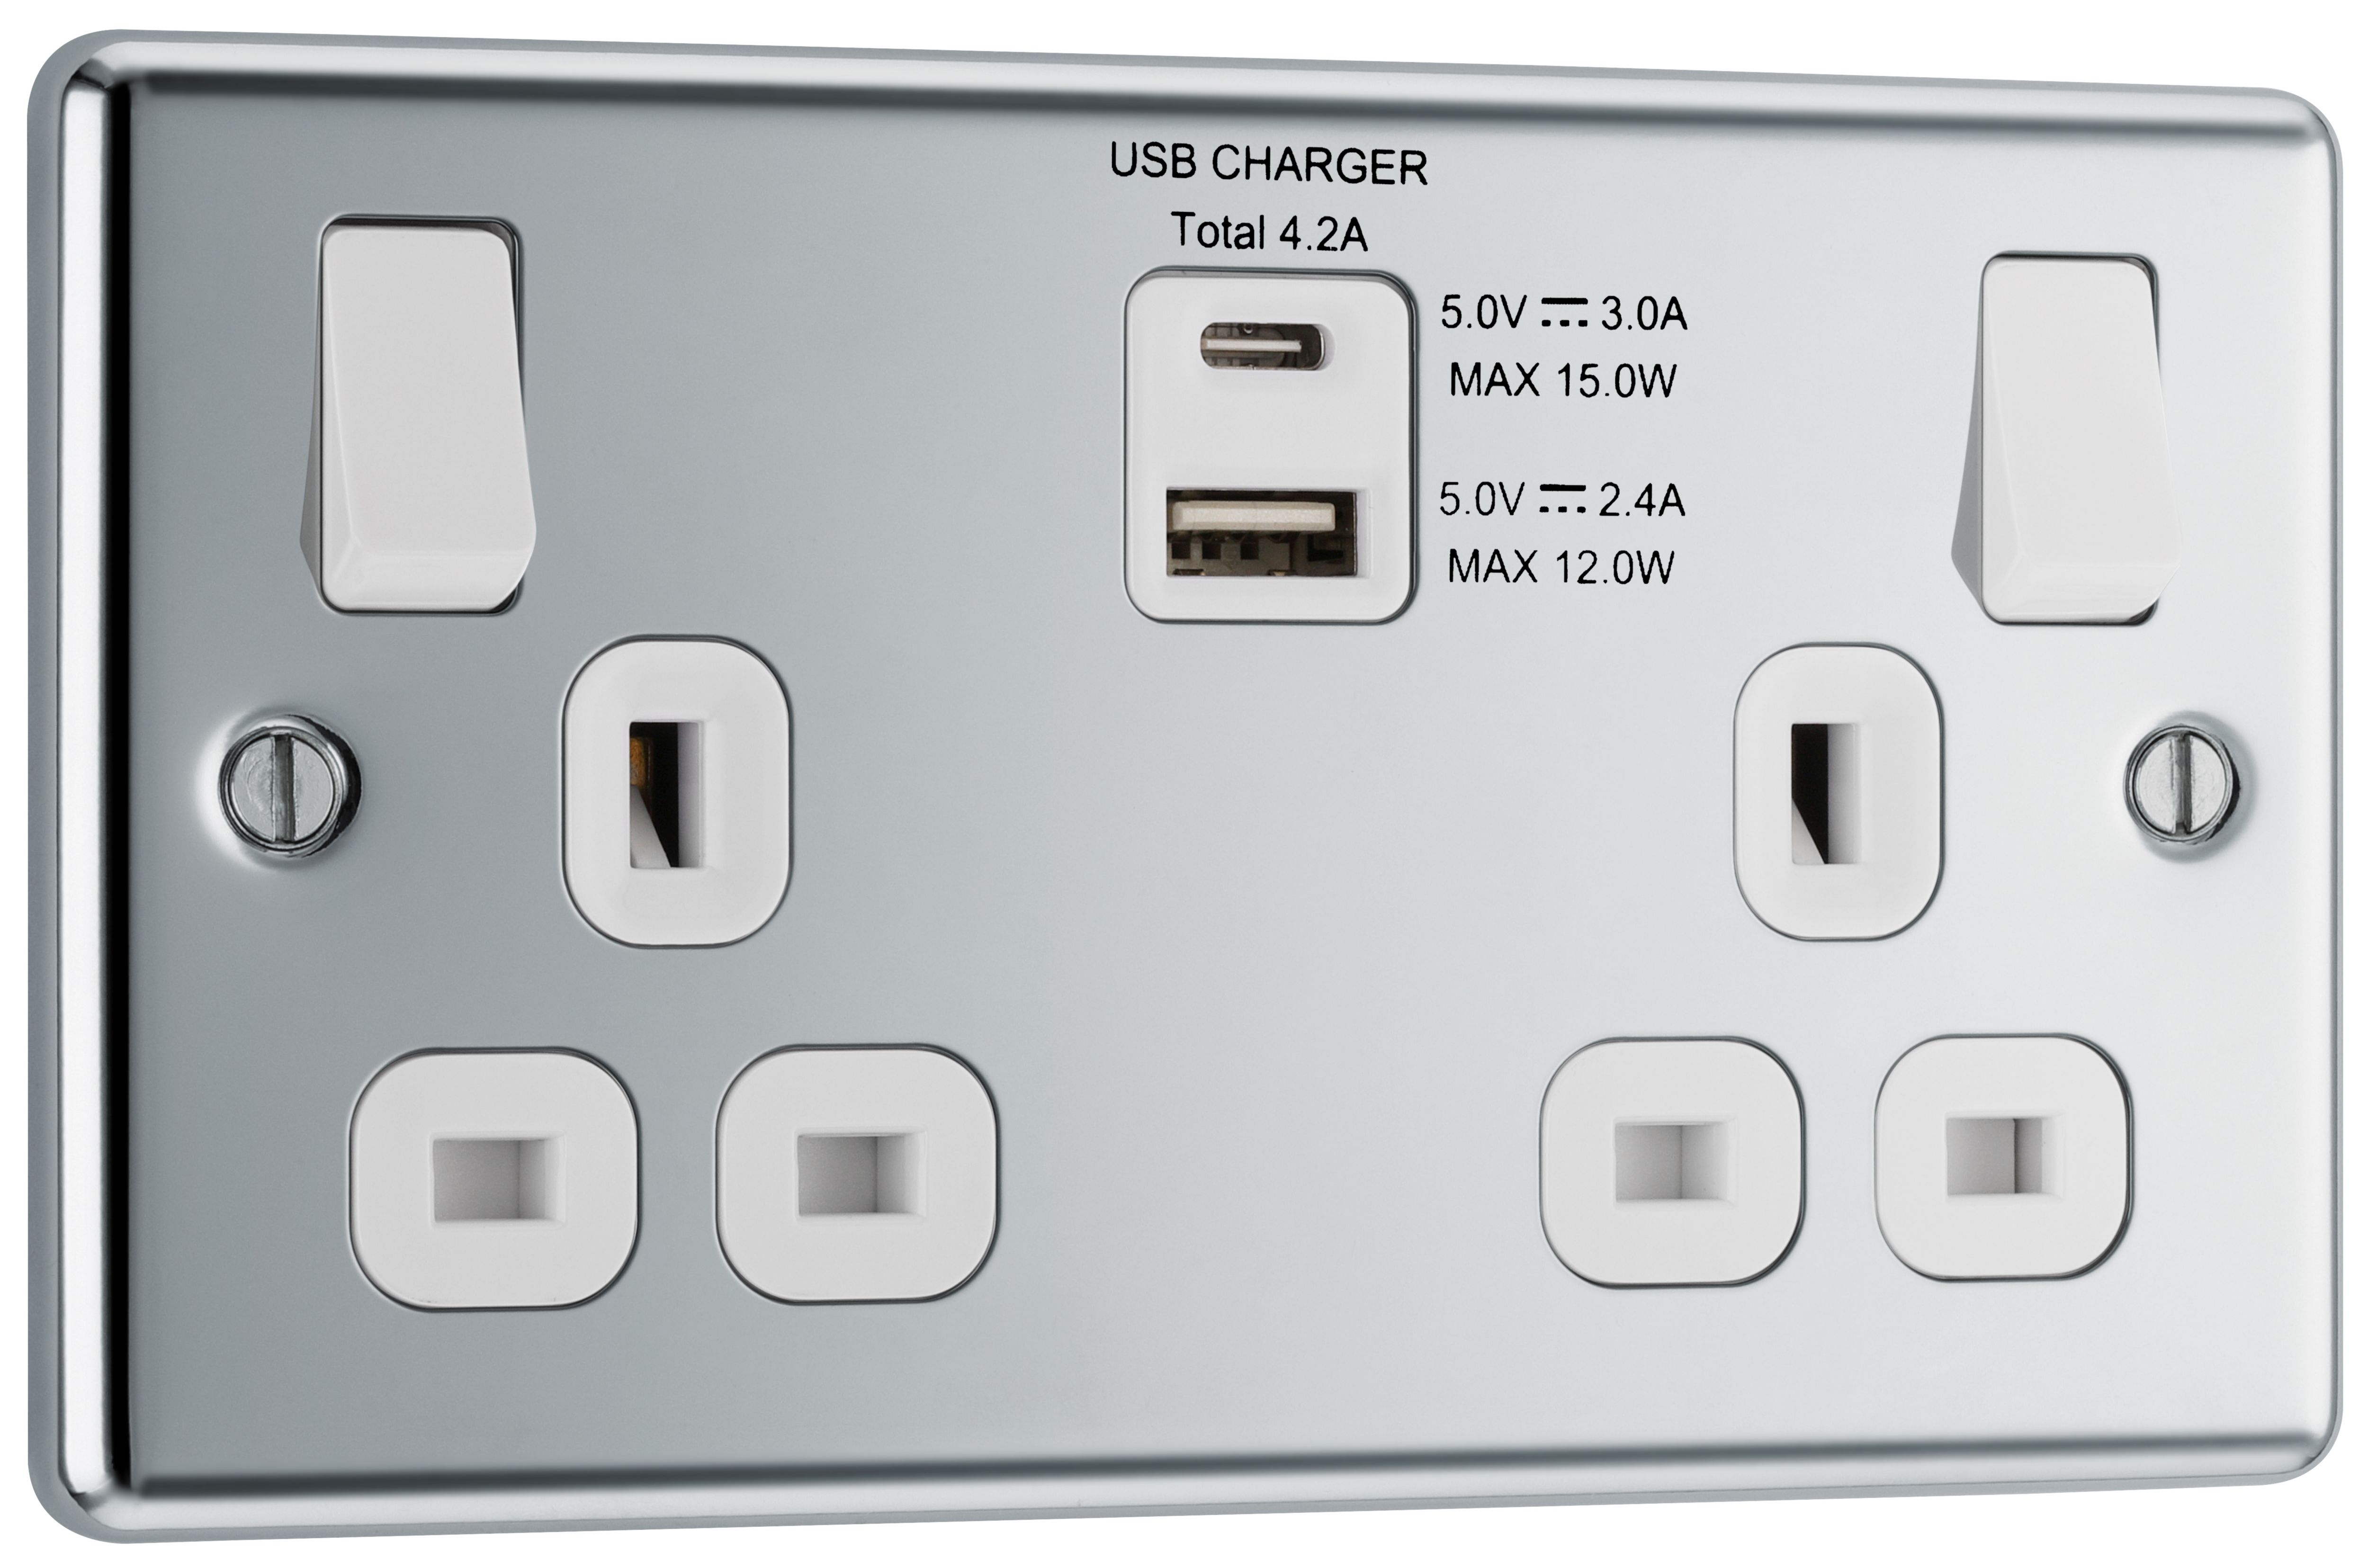 GoodHome Chrome Double 13A Switched Socket with USB x2 4.2A & White inserts